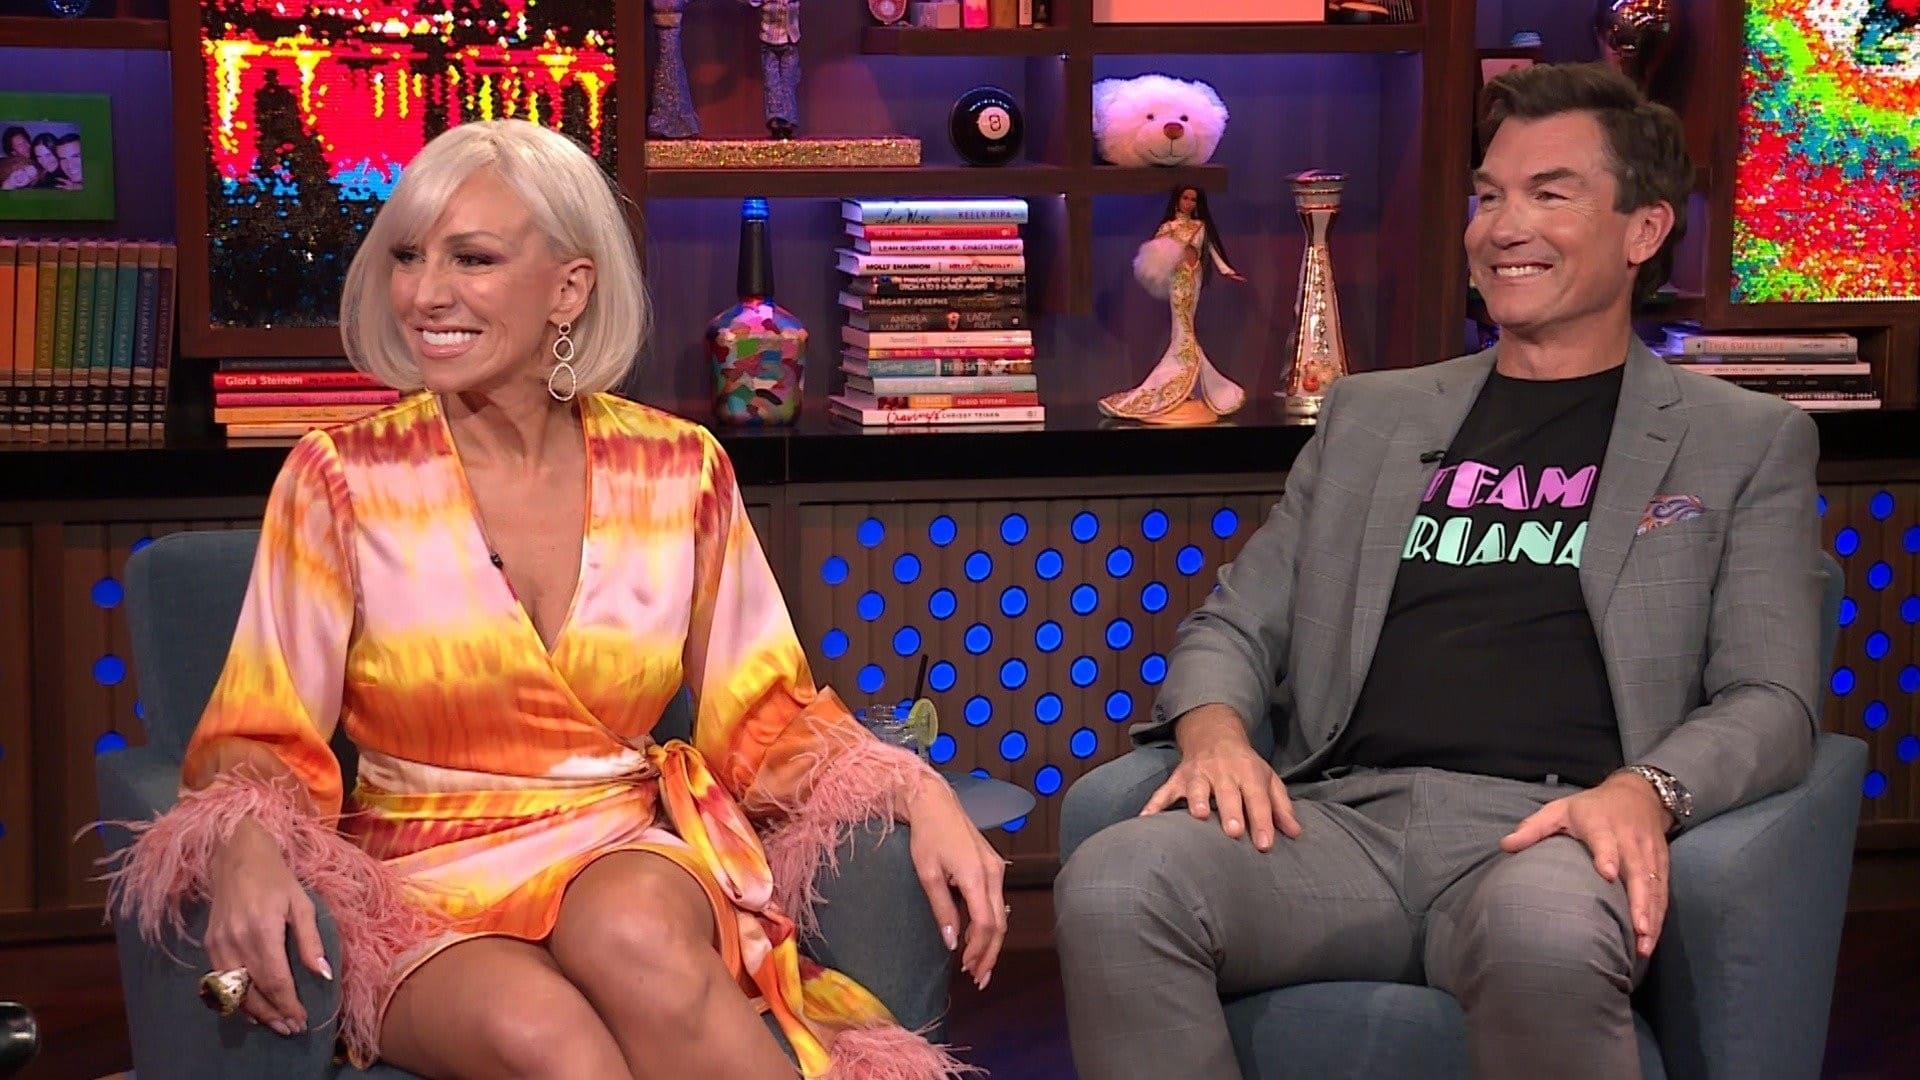 Watch What Happens Live with Andy Cohen Staffel 20 :Folge 45 